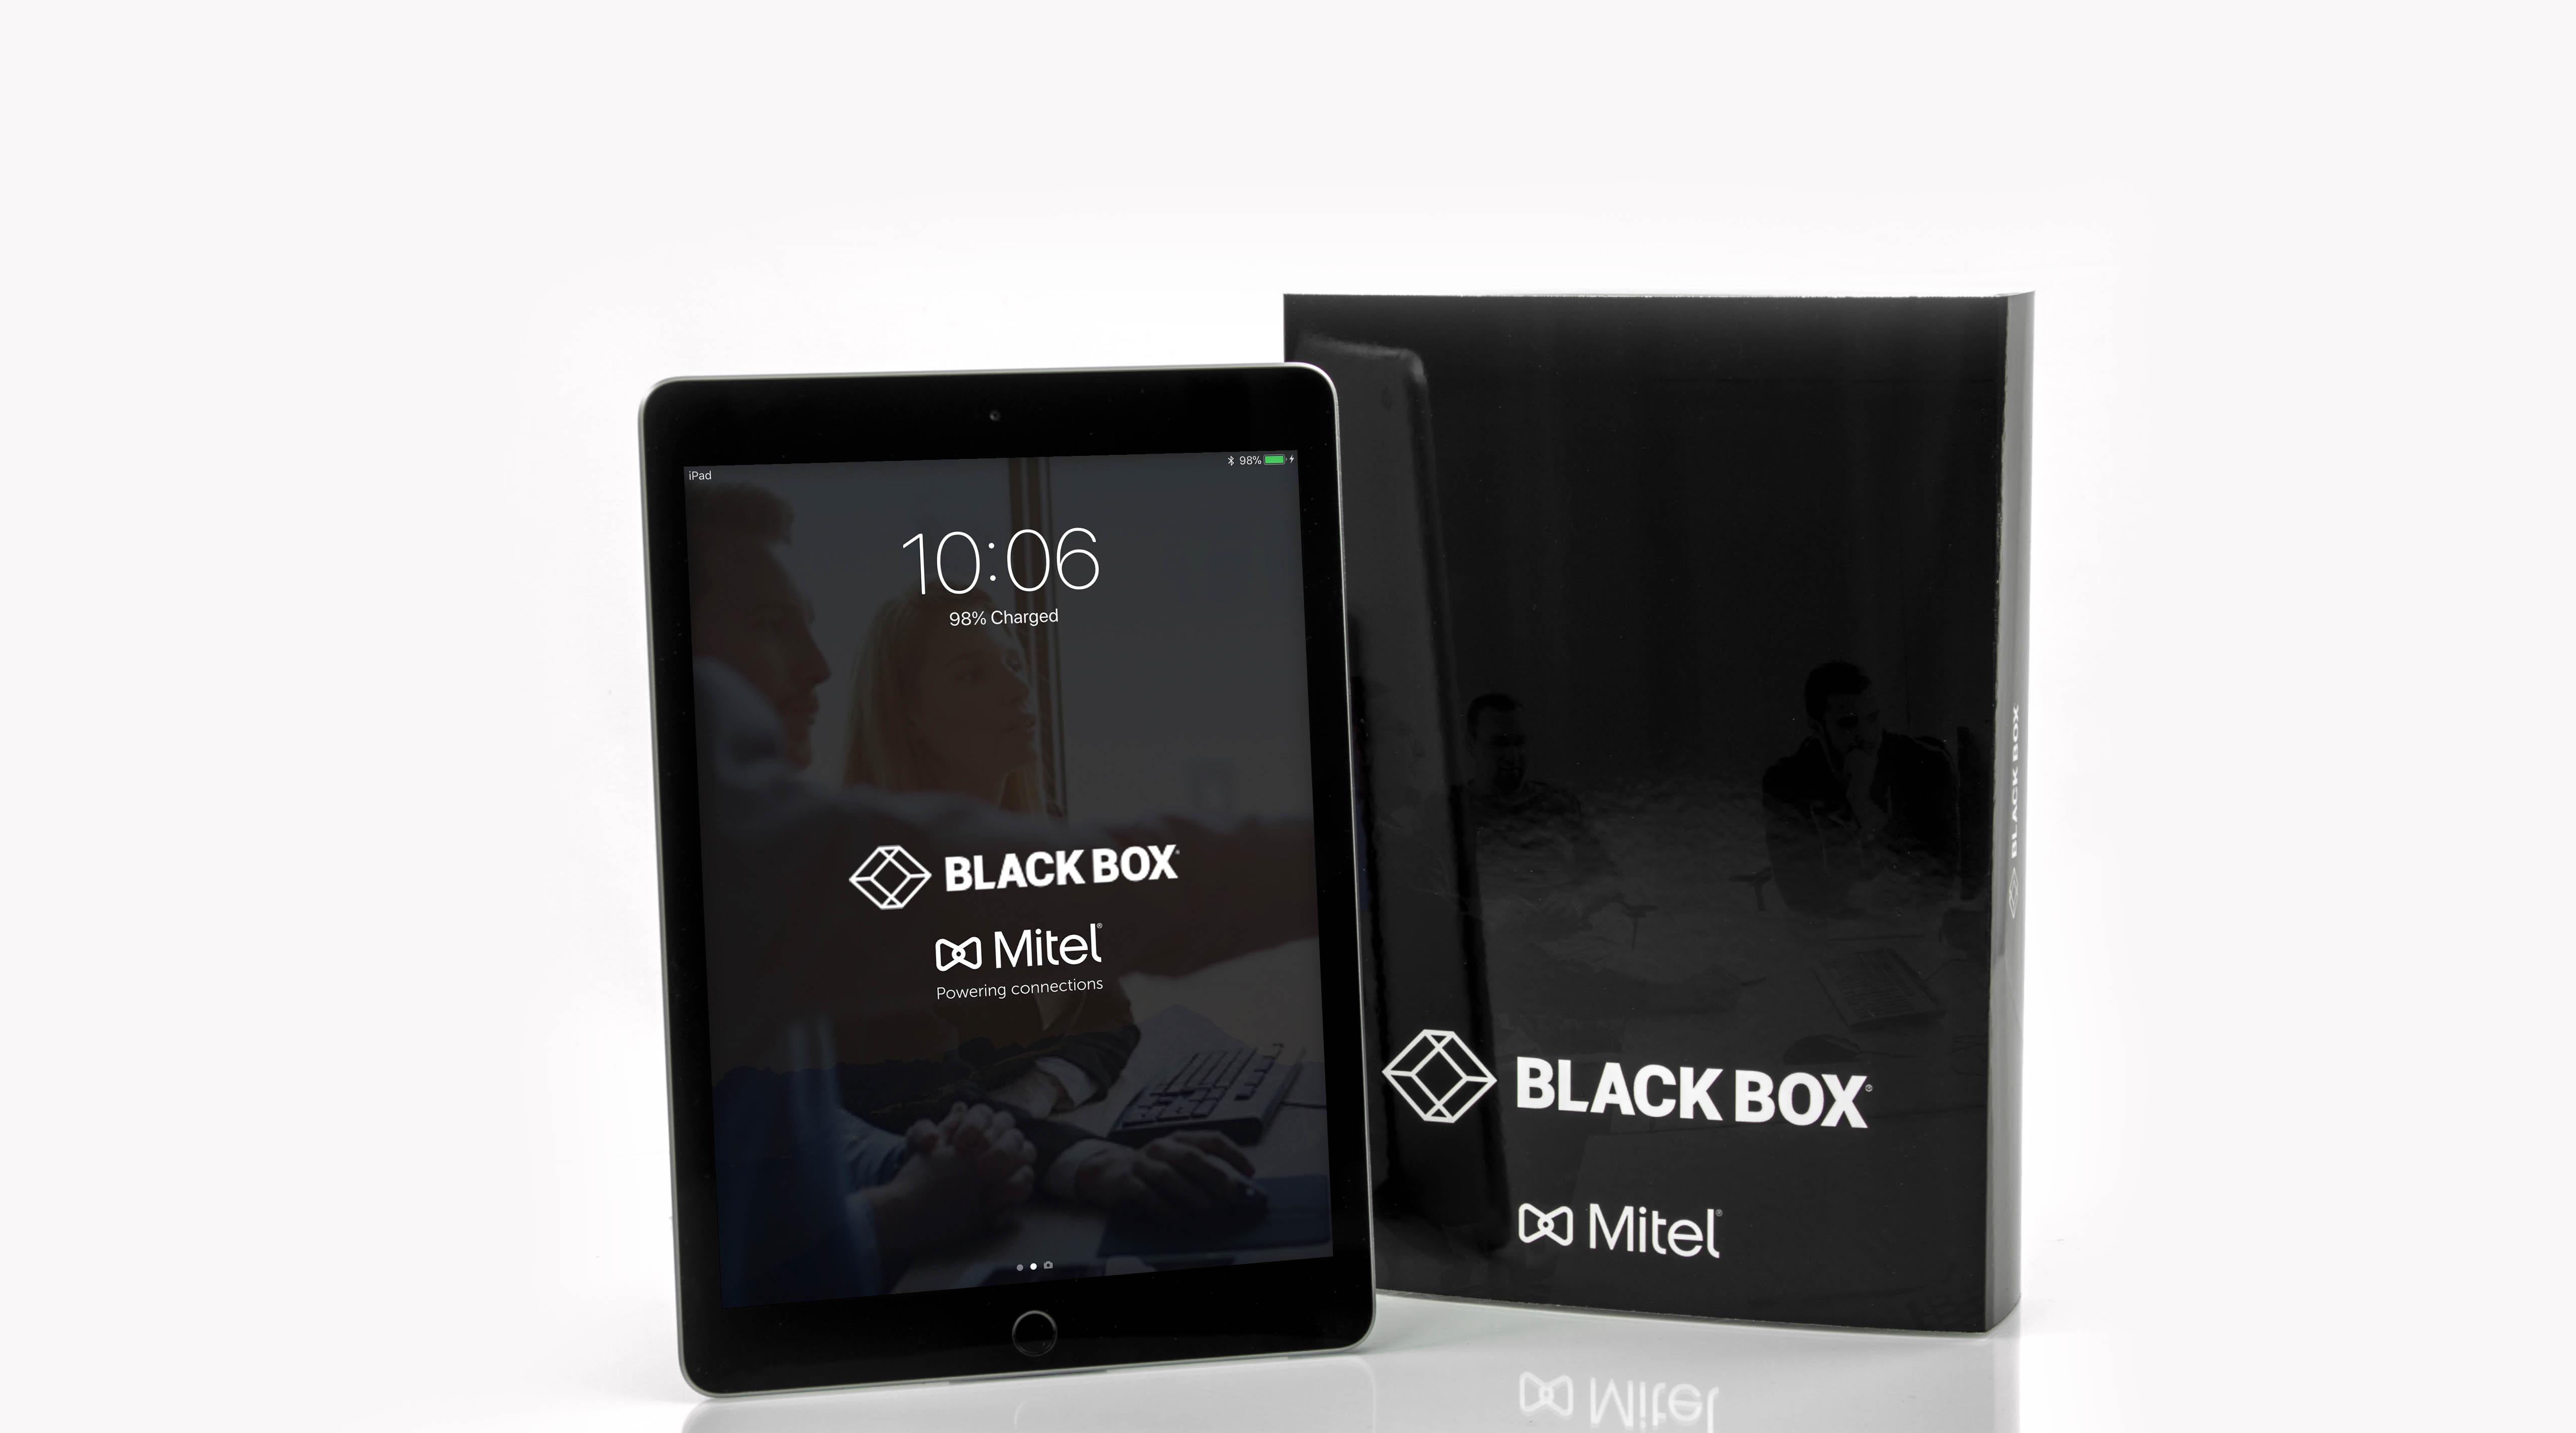 Black Box Corporation used customized Apple iPads with preloaded digital content as employee gifts.